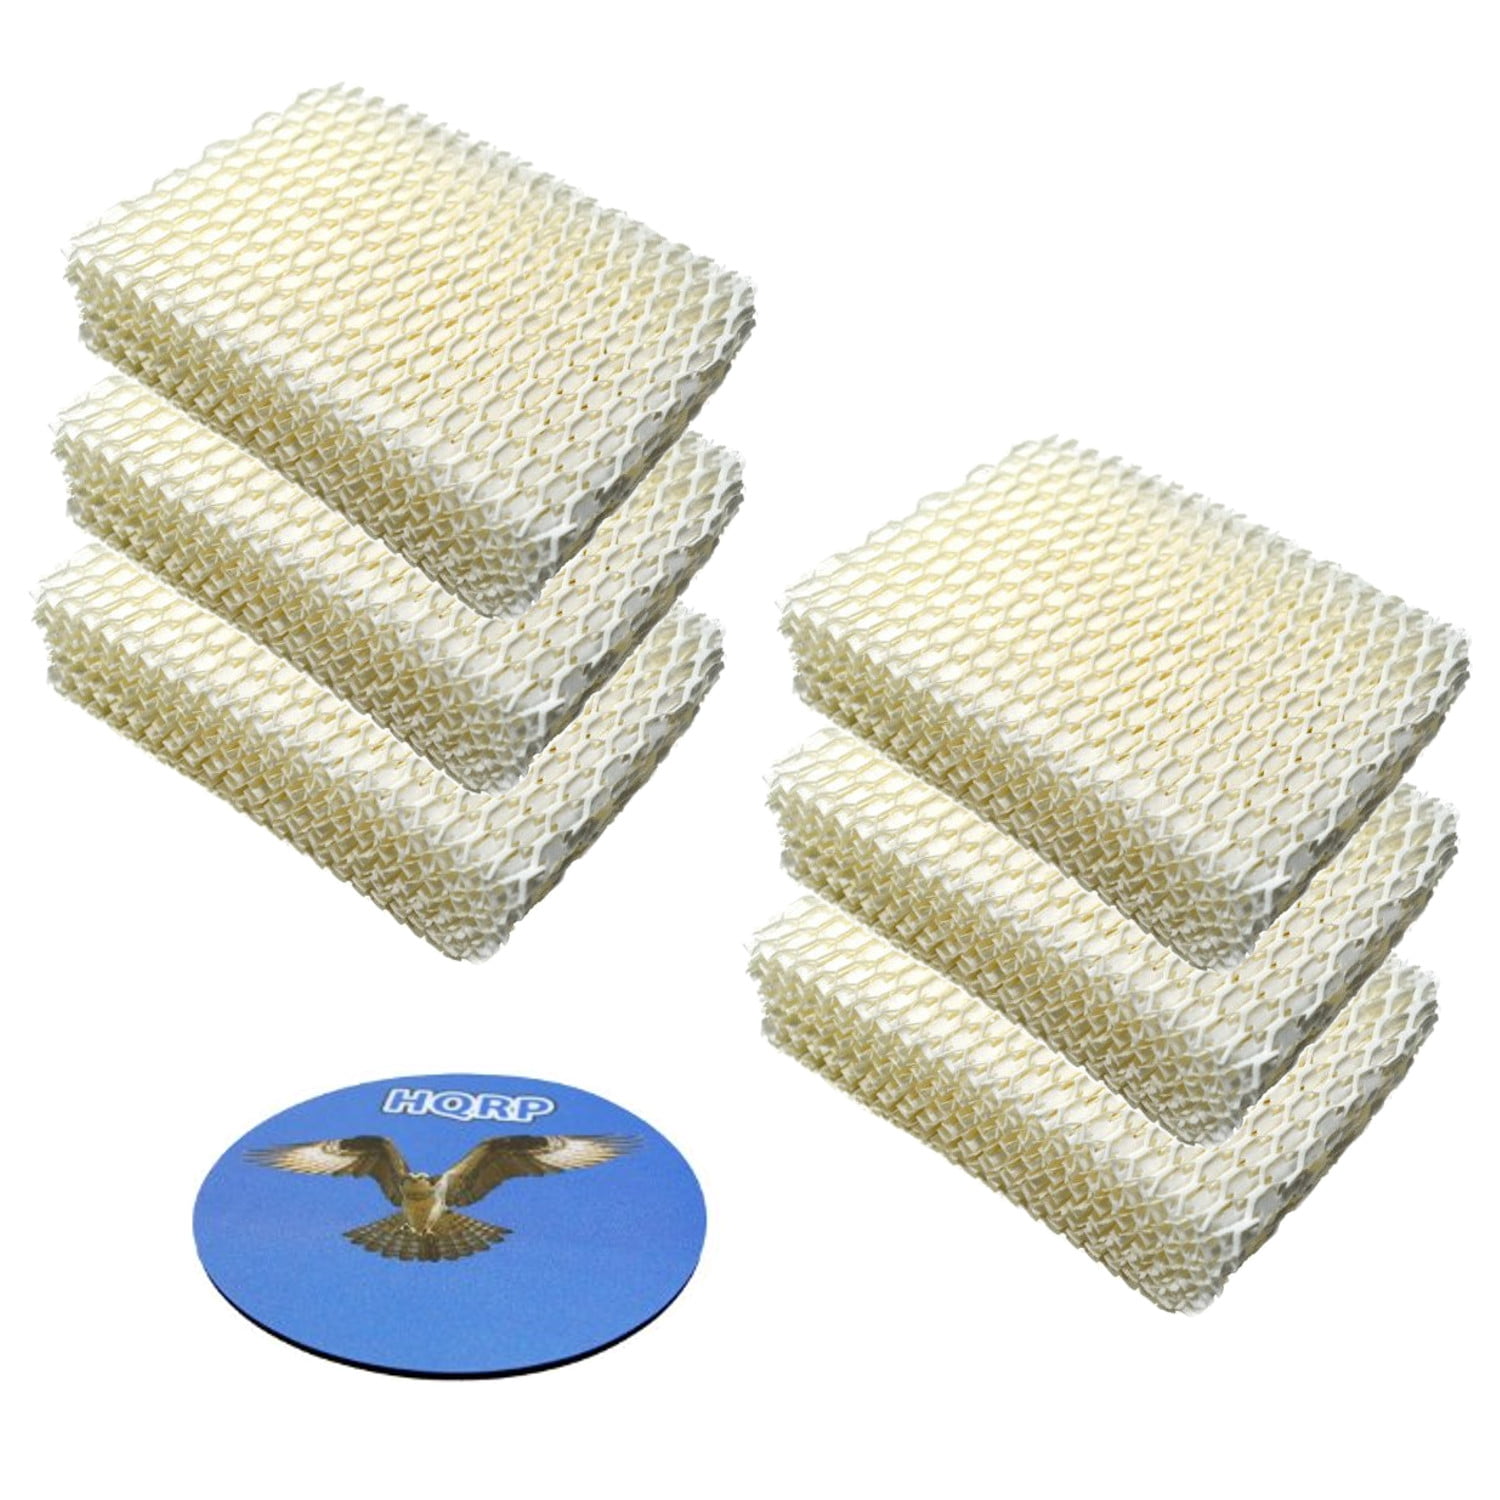 HQRP 6-pack Humidifier Wick Filter for Relion WF813 Replacement fits